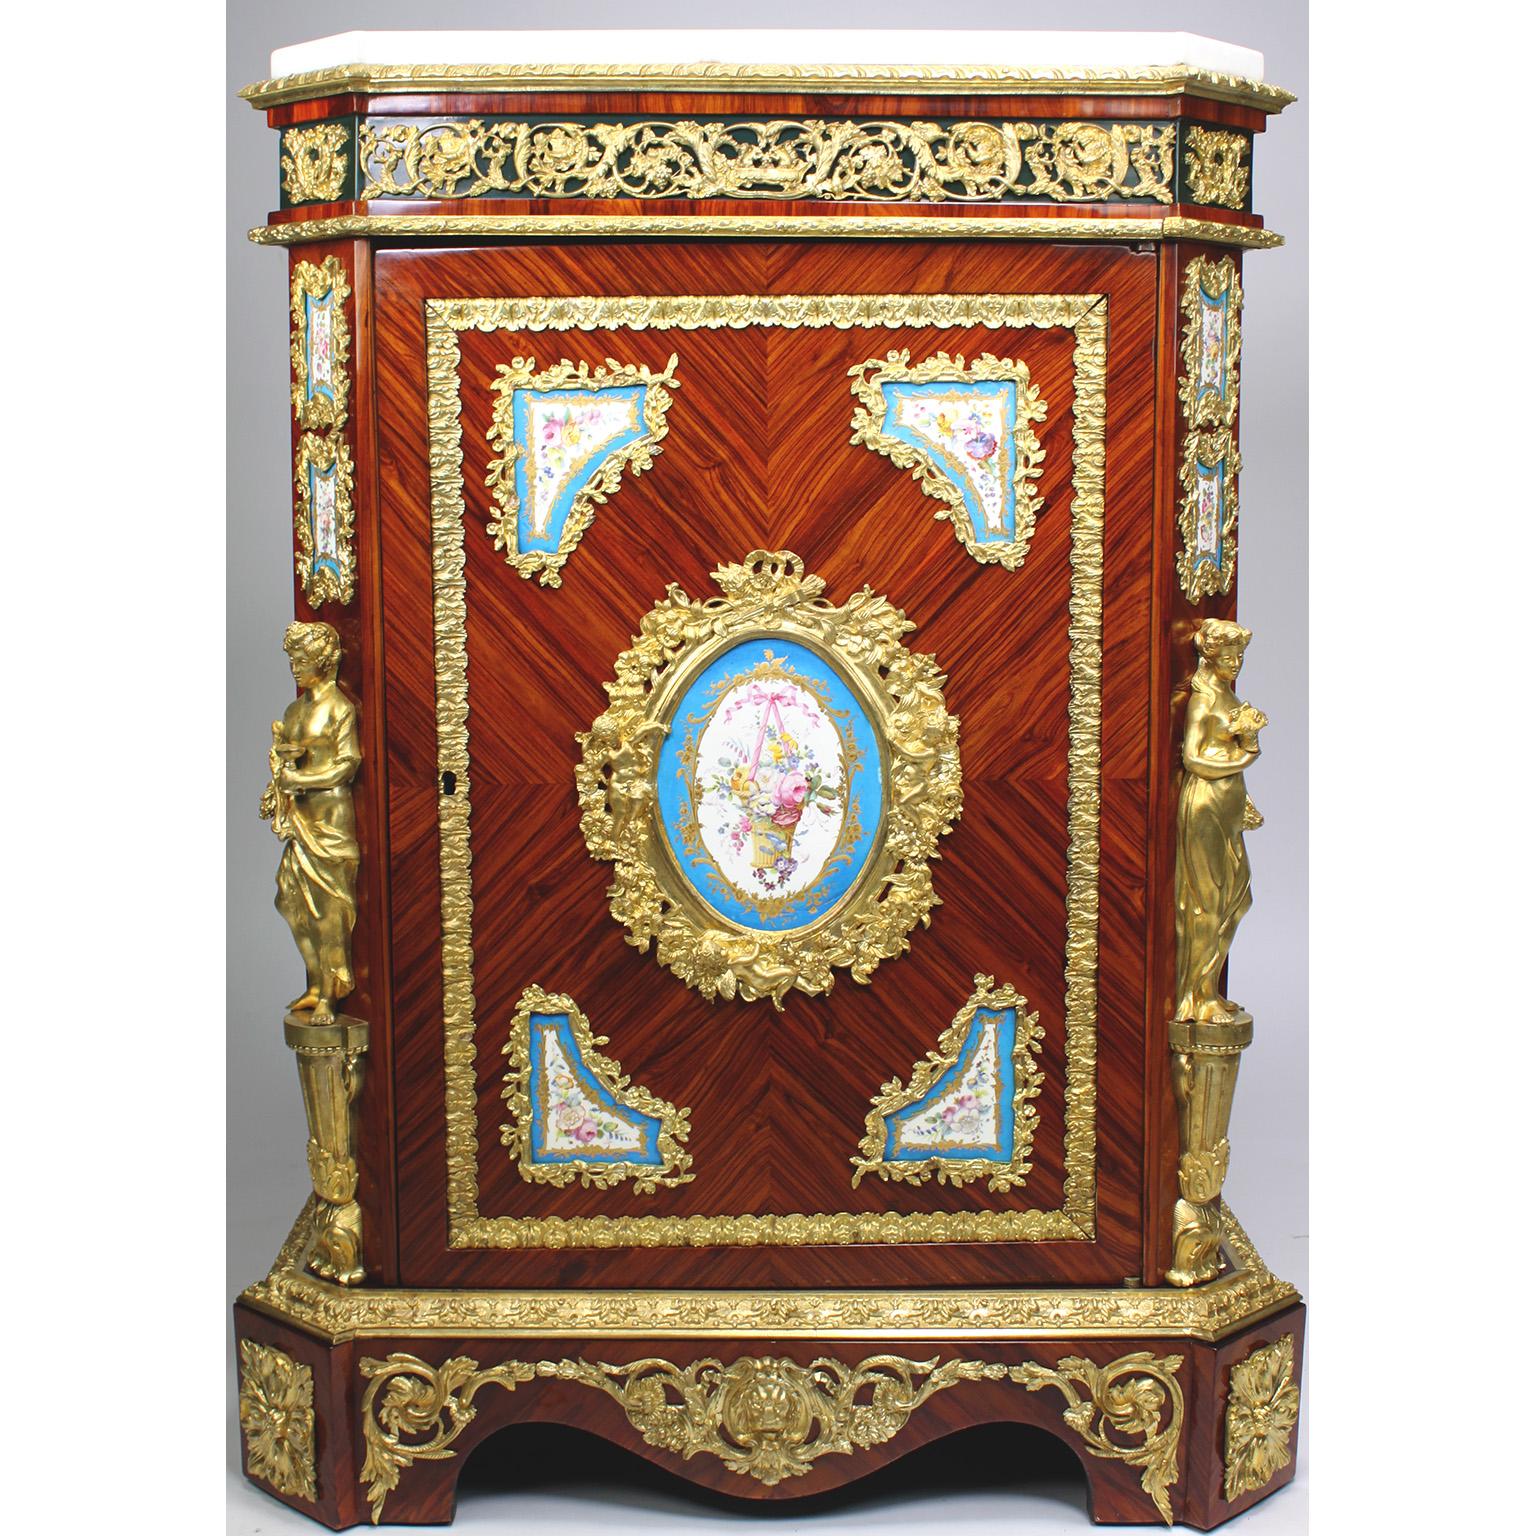 A Very Fine French Napoleon III Figural Ormolu and Porcelain (Probably Sevres) Mounted Tulipwood Meuble A Hauteur D'Appui, by Mathieu Befort, dit Befort Jeune. The rectangular shaped body fitted with a white marble top on with a reticulated frieze